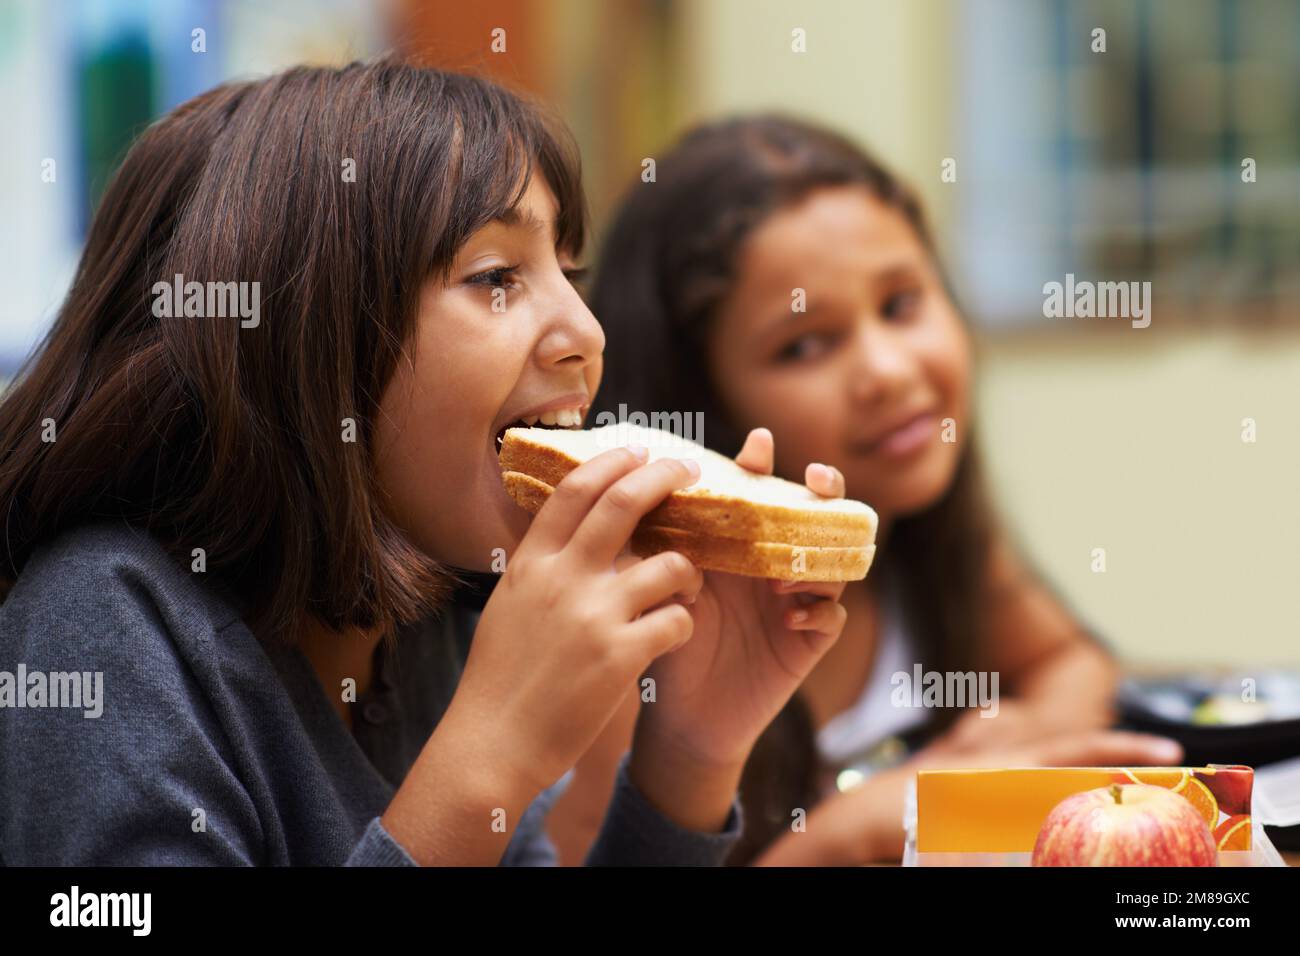 Enjoying a sandwich during recess. A young school girl eating her sandwich in the cafeteria during lunchtime. Stock Photo